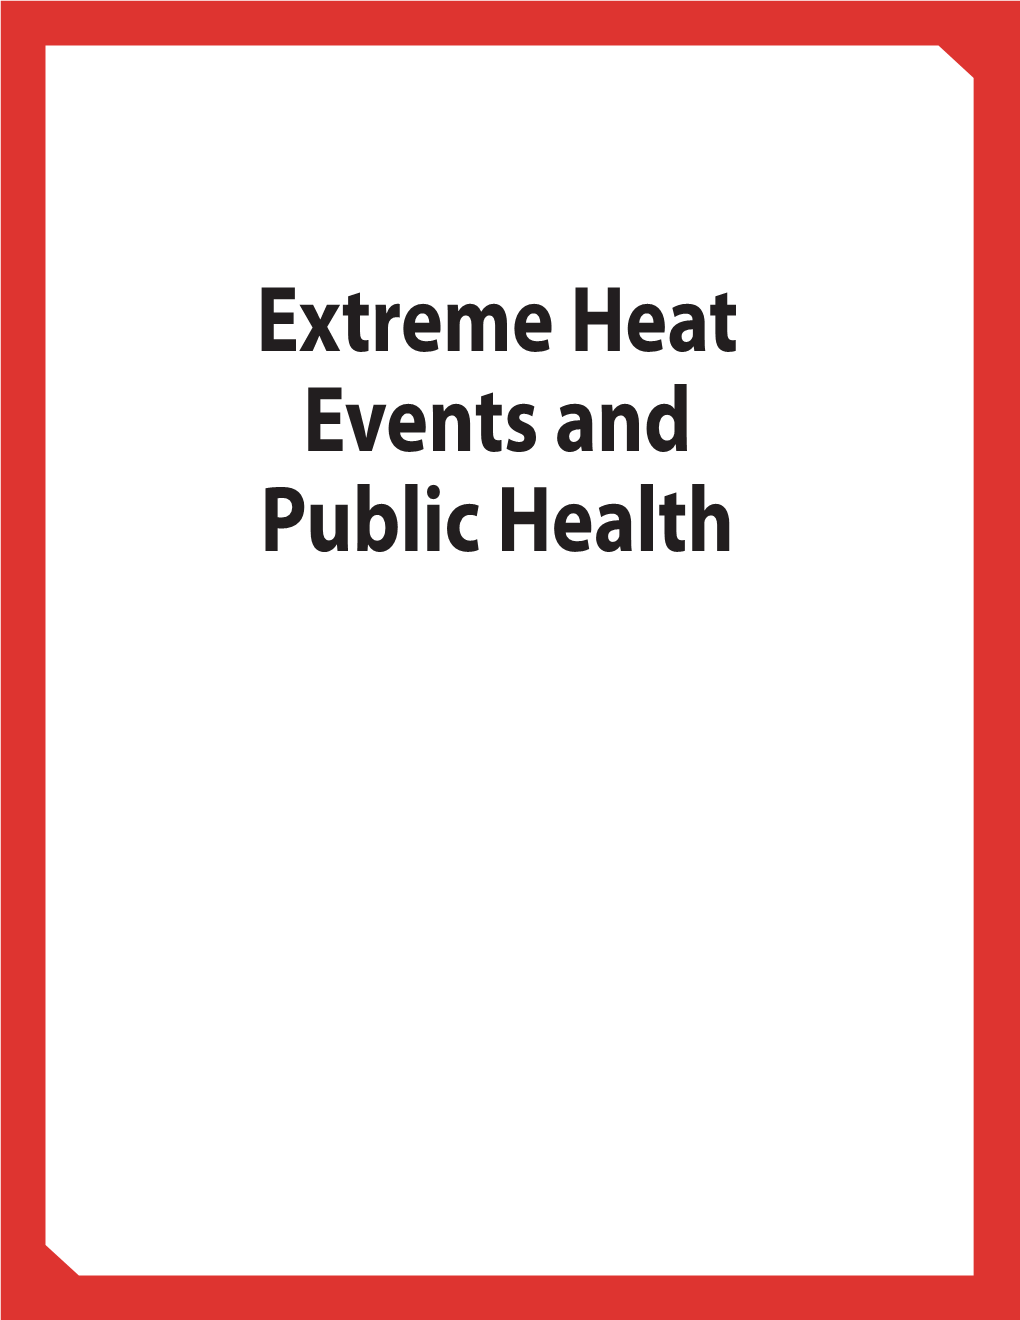 Extreme Heat Events and Public Health Er 2Haptc 2-2 Days Andpm10 Seemsto More Significantly Affecttheelderly